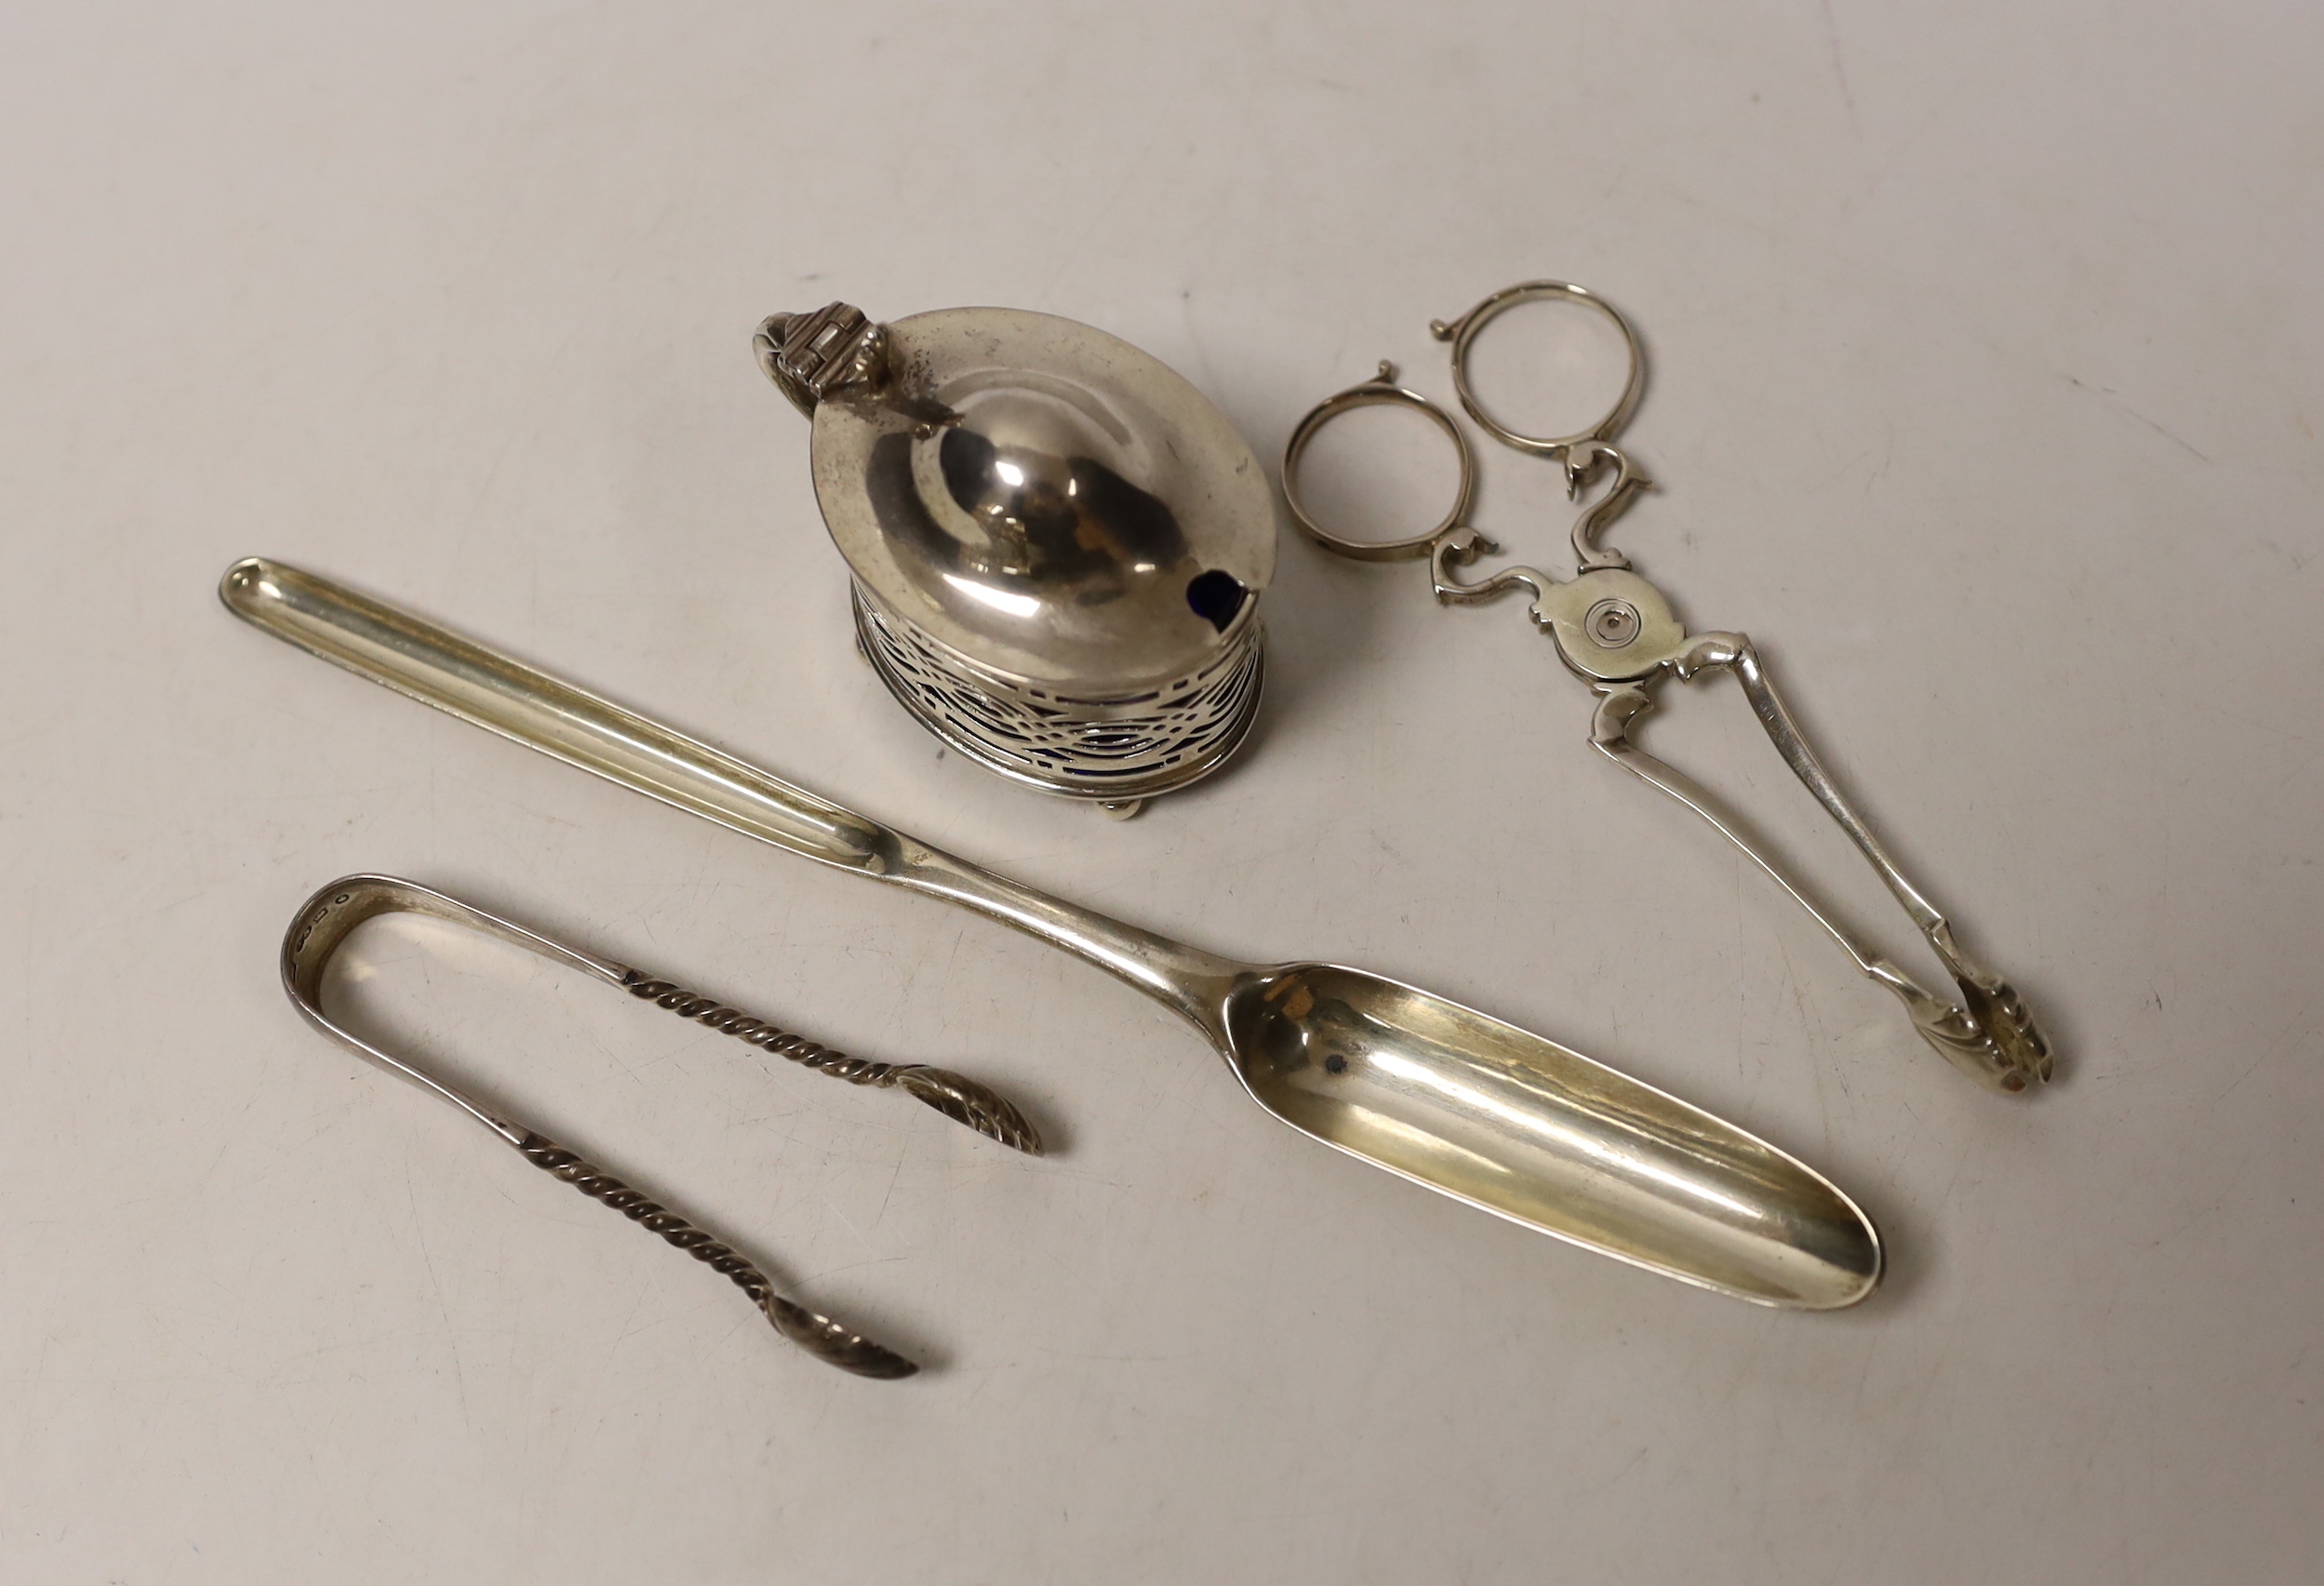 A George III silver marrow scoop, Stephen Adam, London, 1772, 21.5cm, a pair of mid to late 18th century silver sugar nips, a later silver mustard and pair of silver sugar tongs.